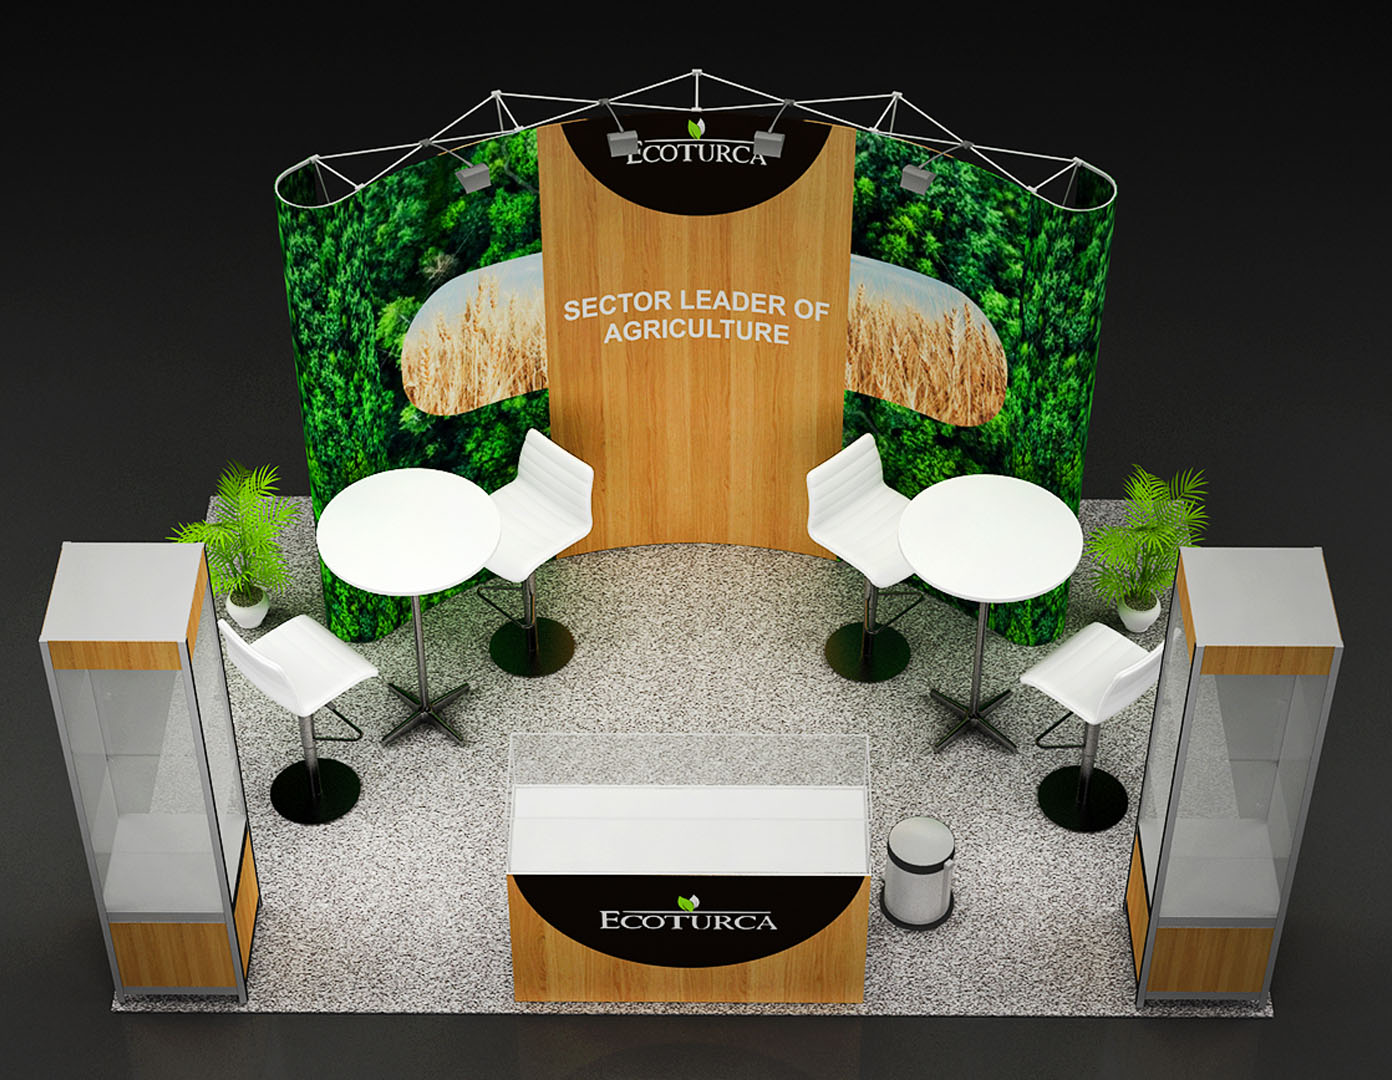 Complete Portable Pop Up Booths, Trade Show Graphics